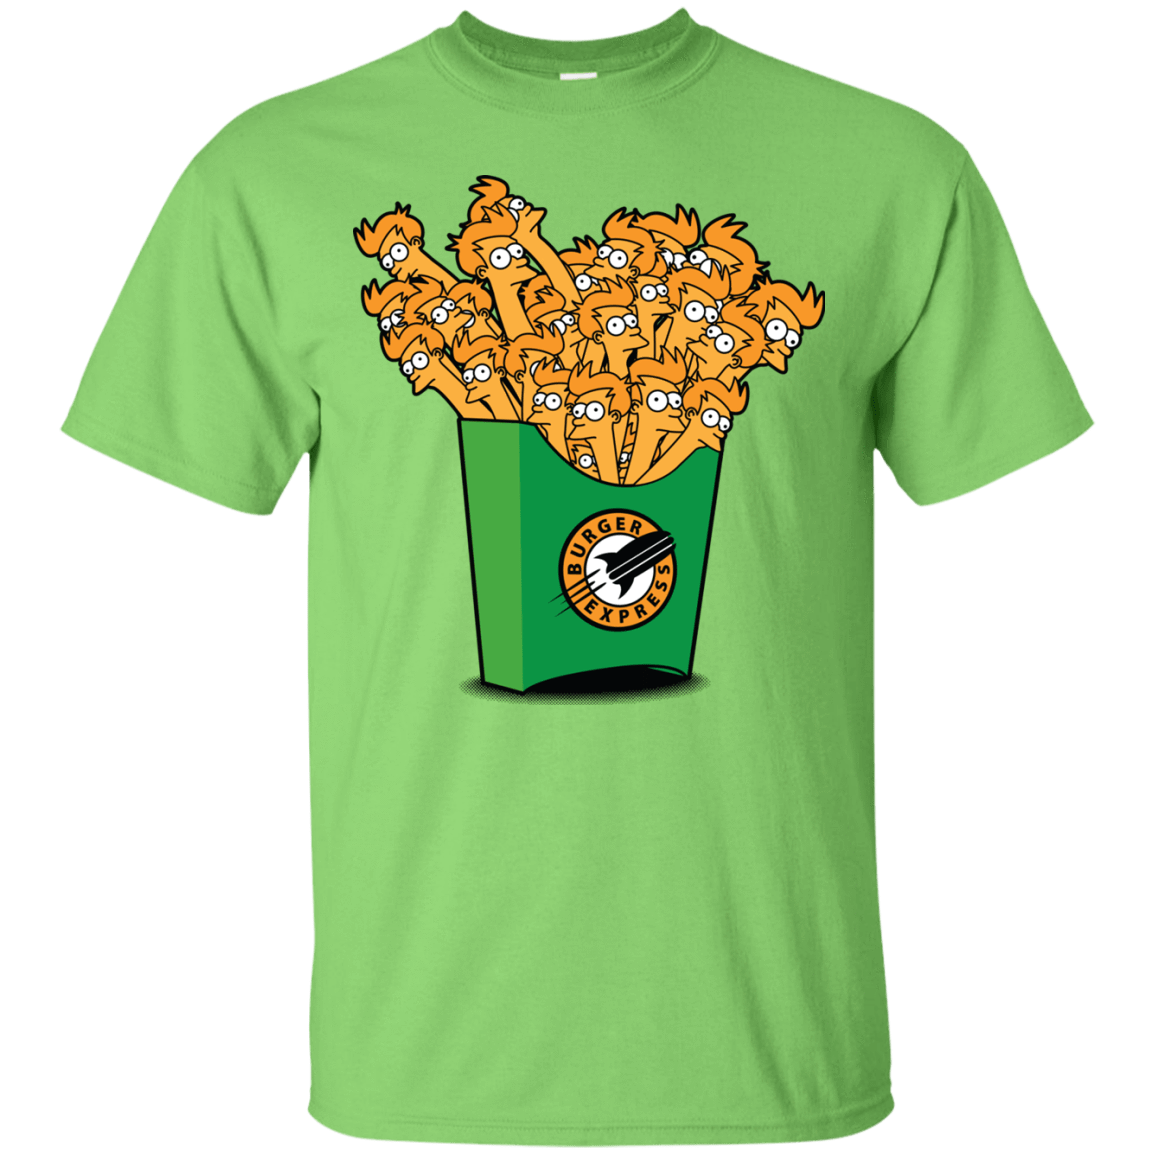 T-Shirts Lime / Small Box of Fries T-Shirt